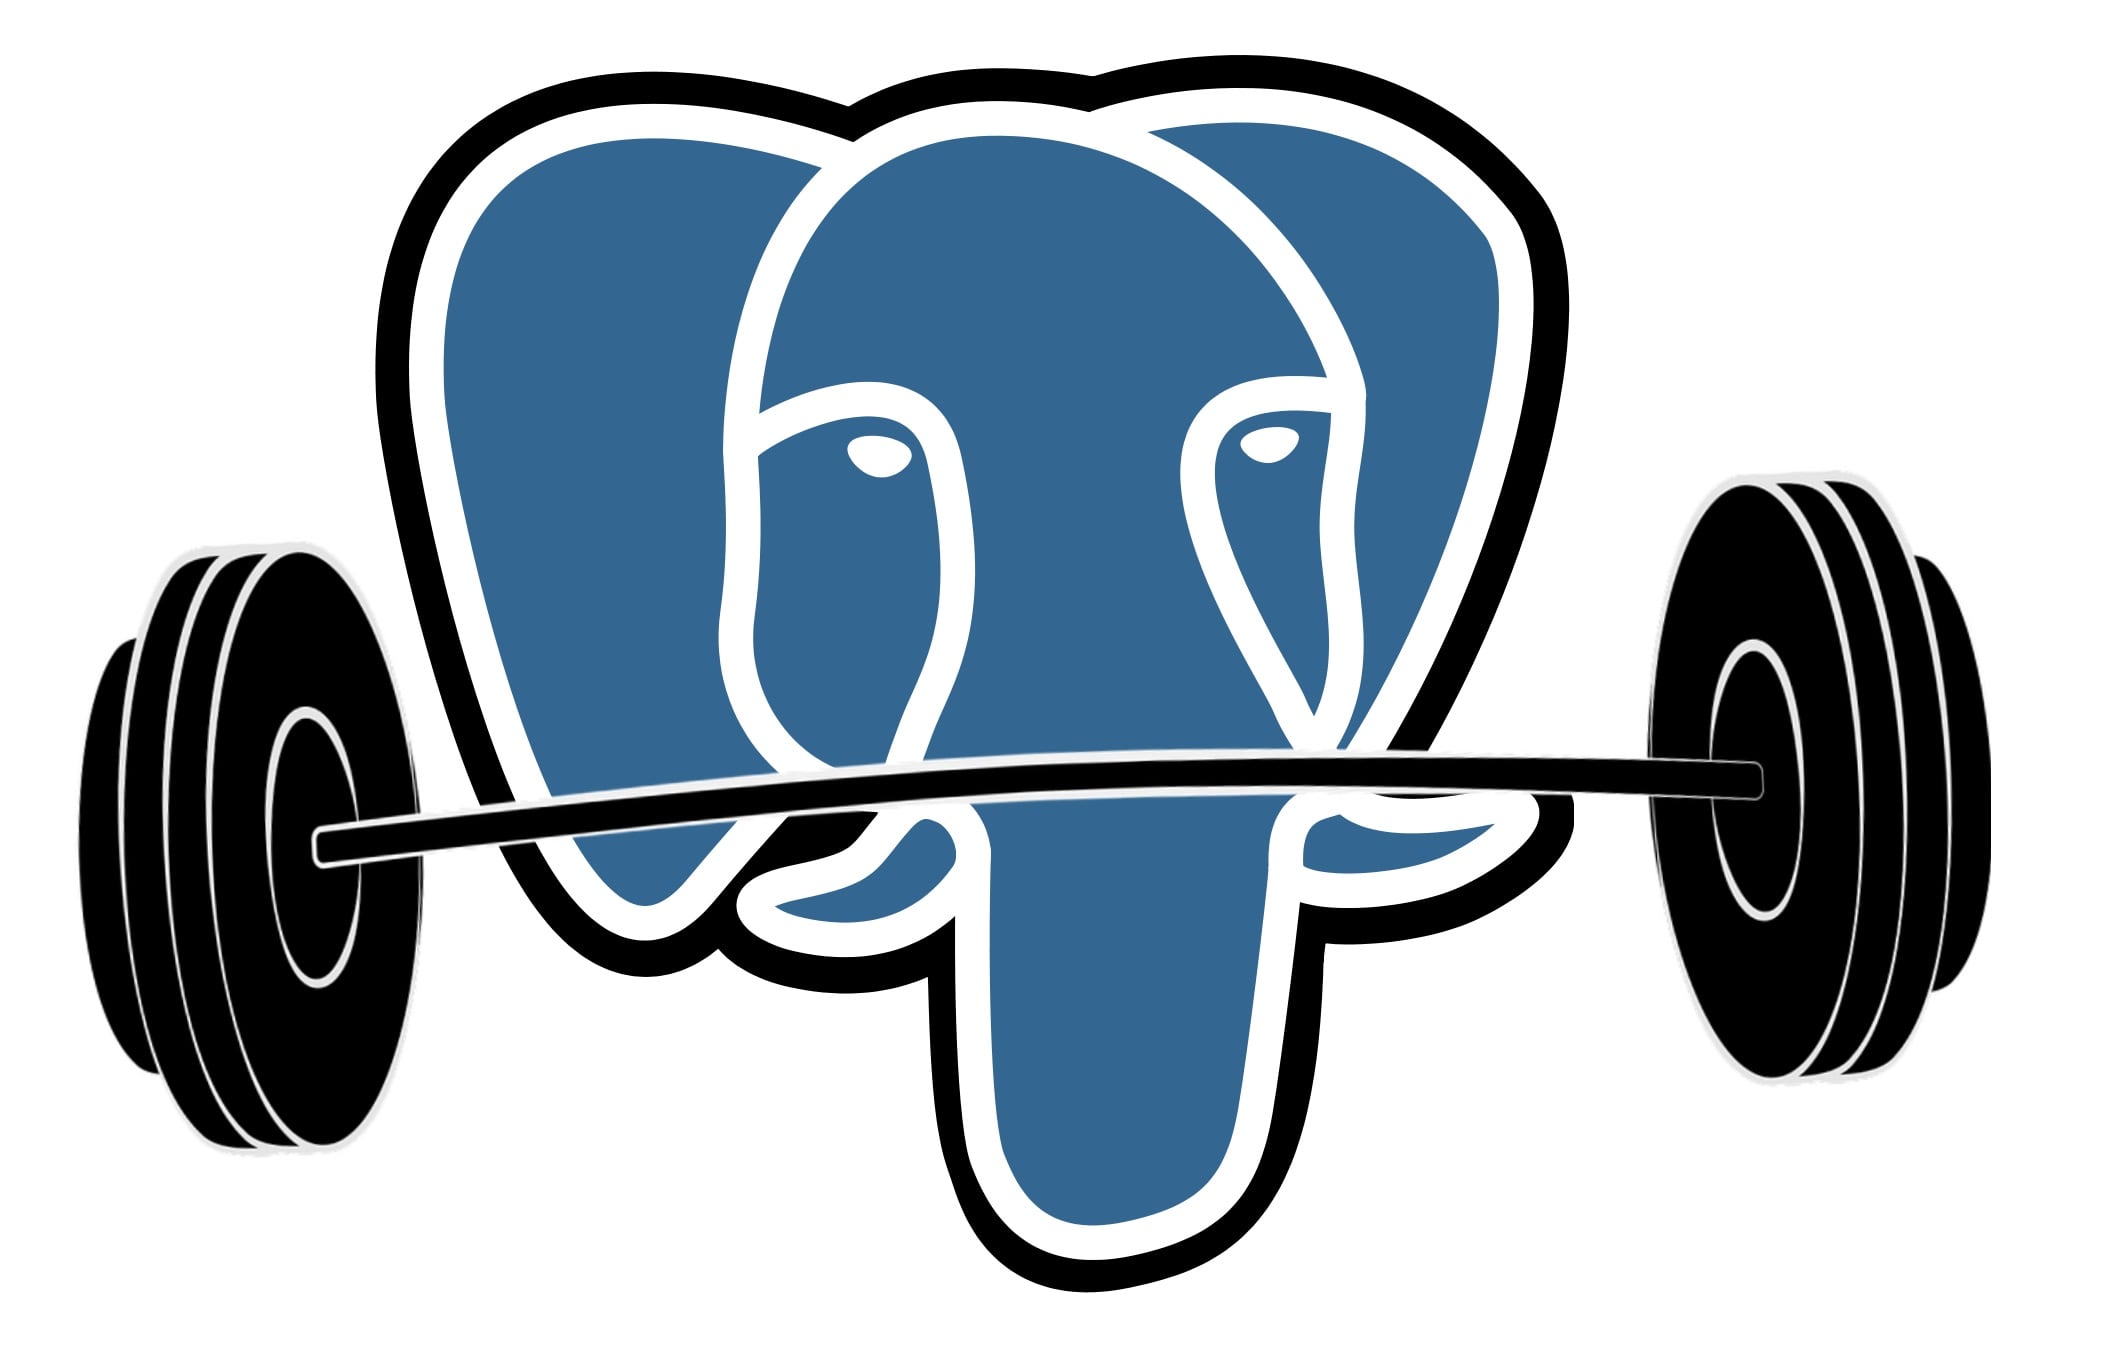 Postgres is a pretty powerful relational database system.